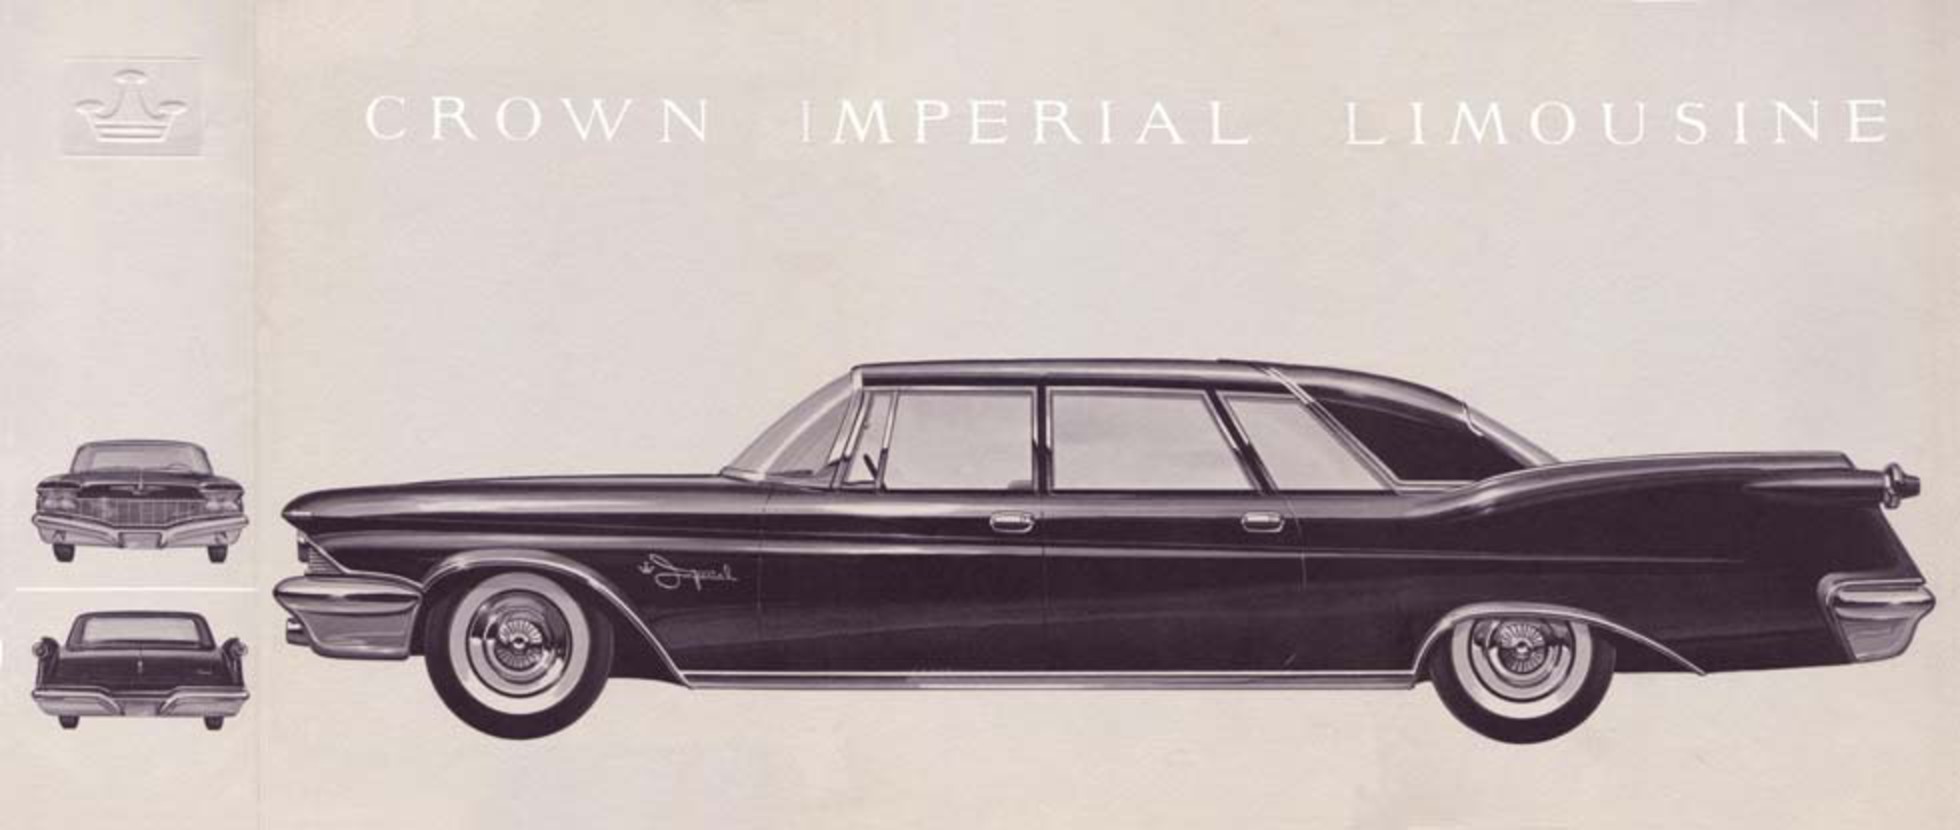 Imperial Crown Imperial Limousine: Photo gallery, complete ...